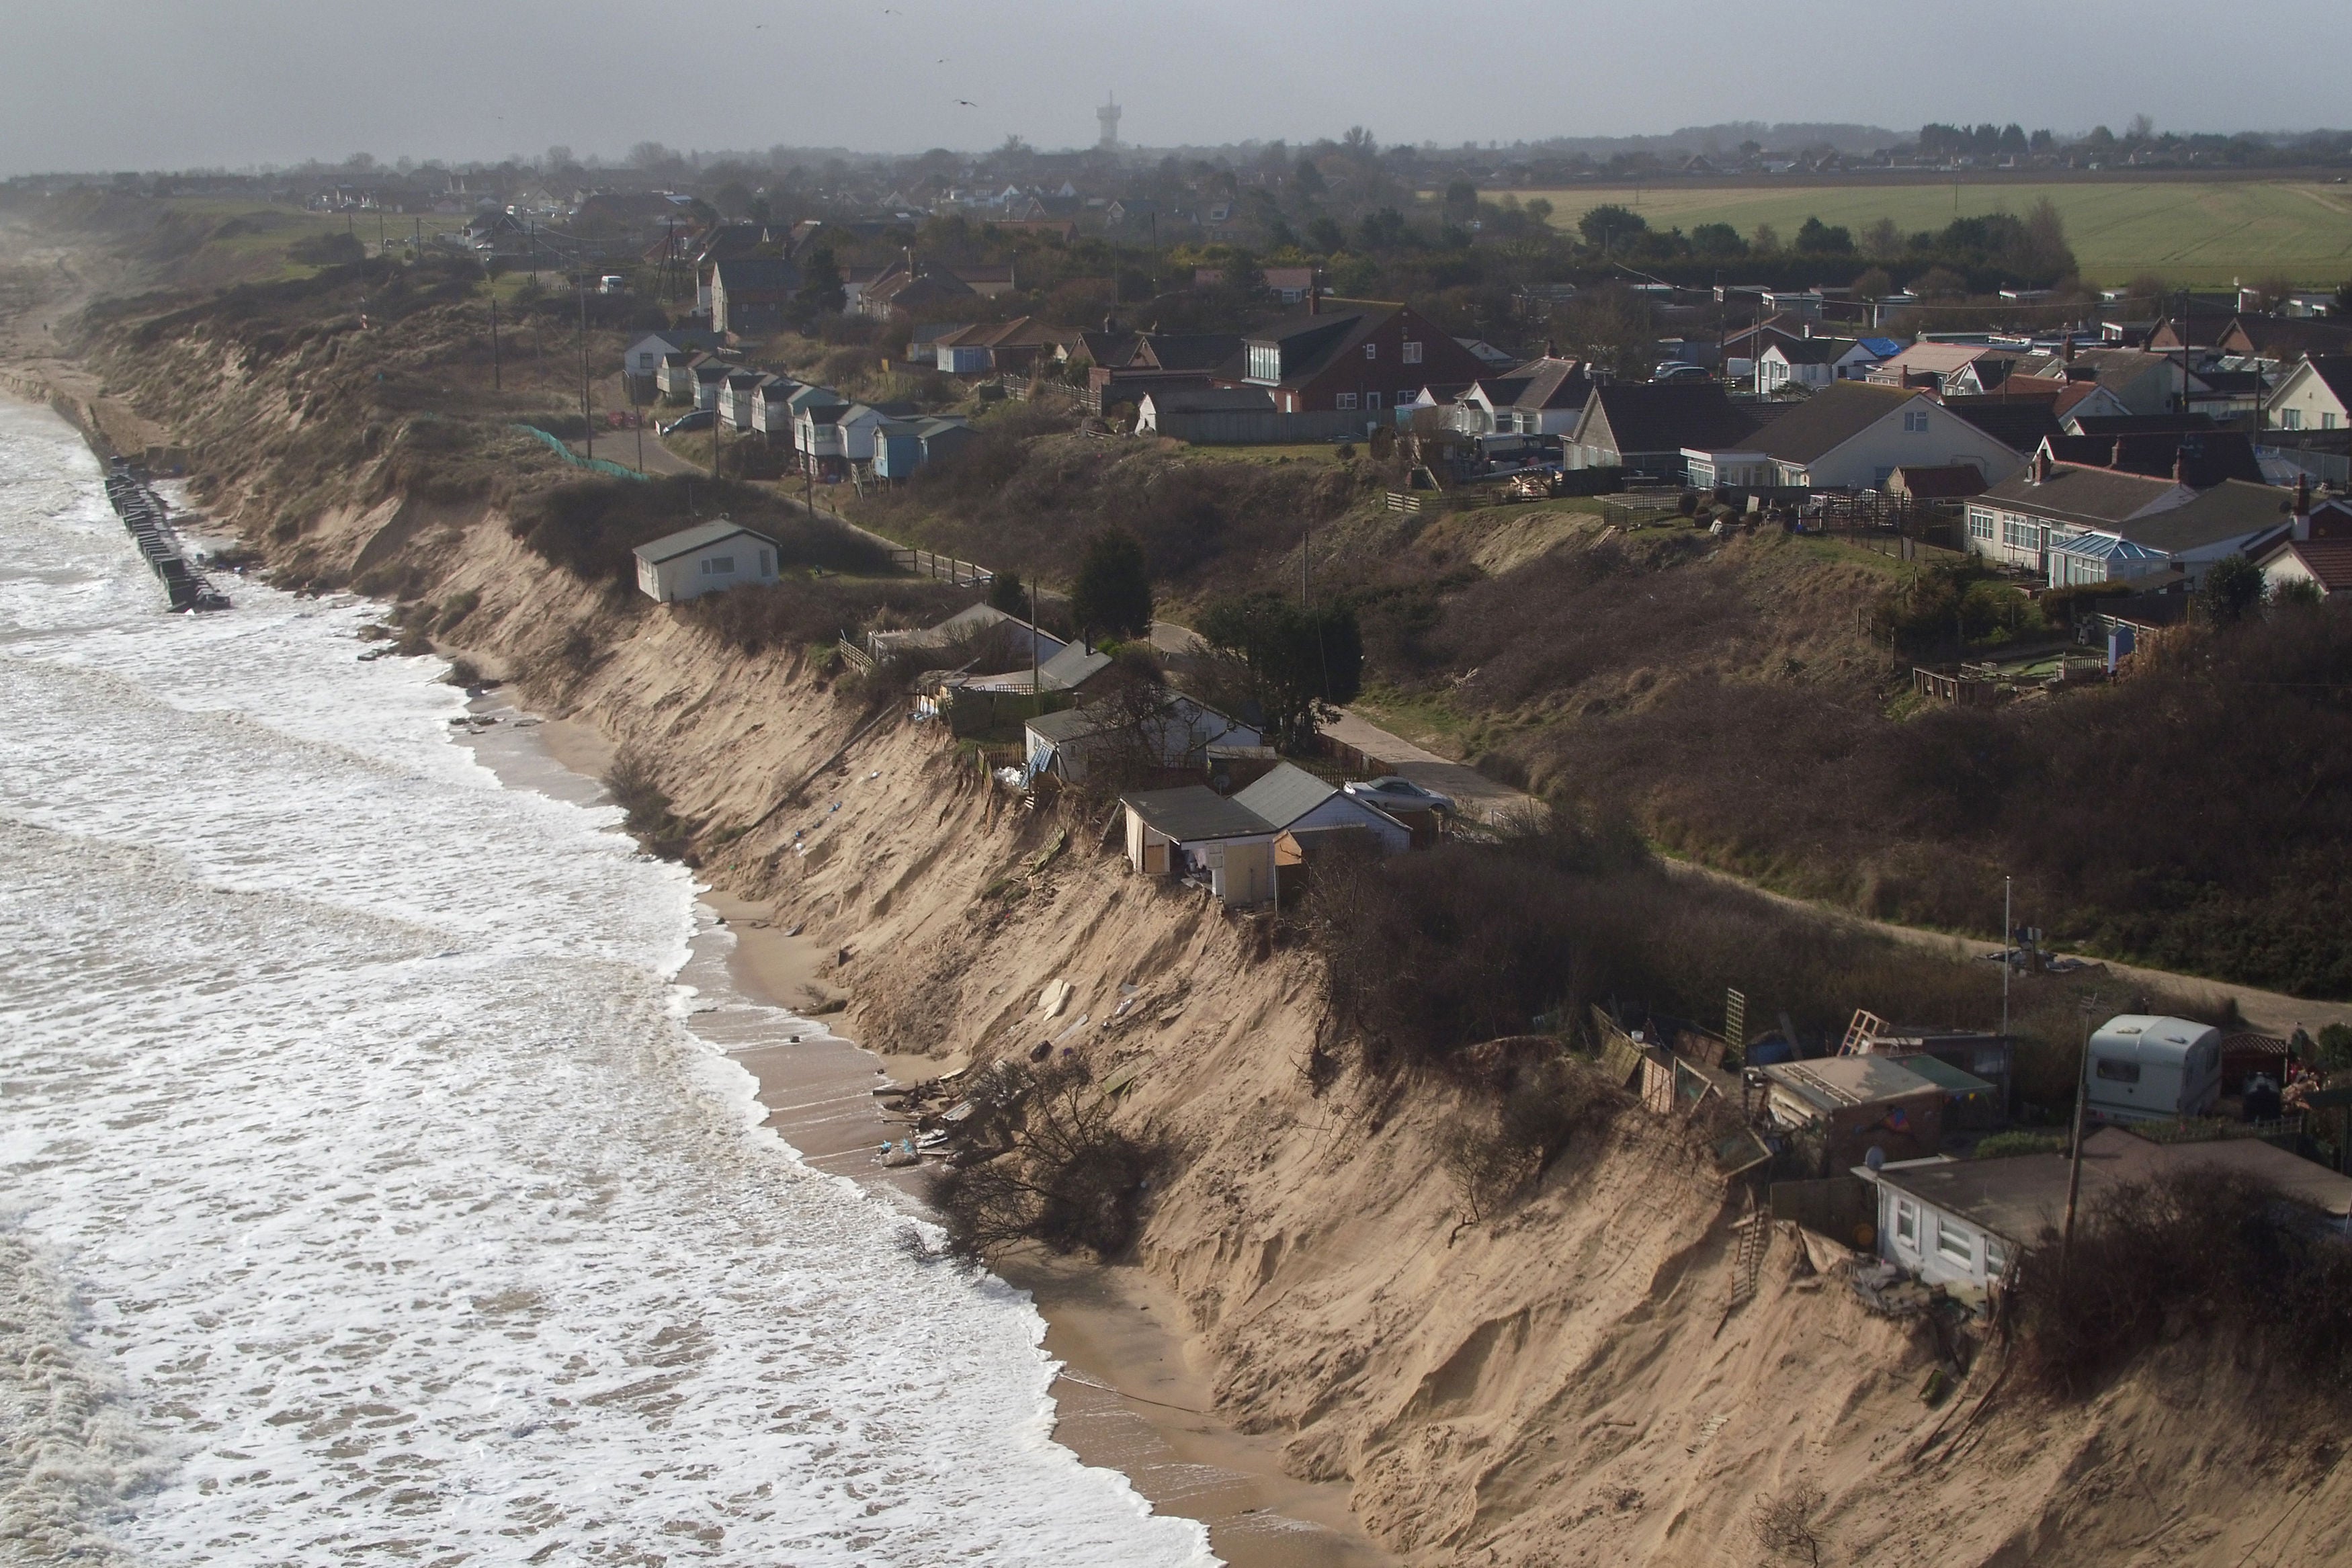 Houses sitting on the cliff edge on The Marrams in Hemsby, Norfolk.